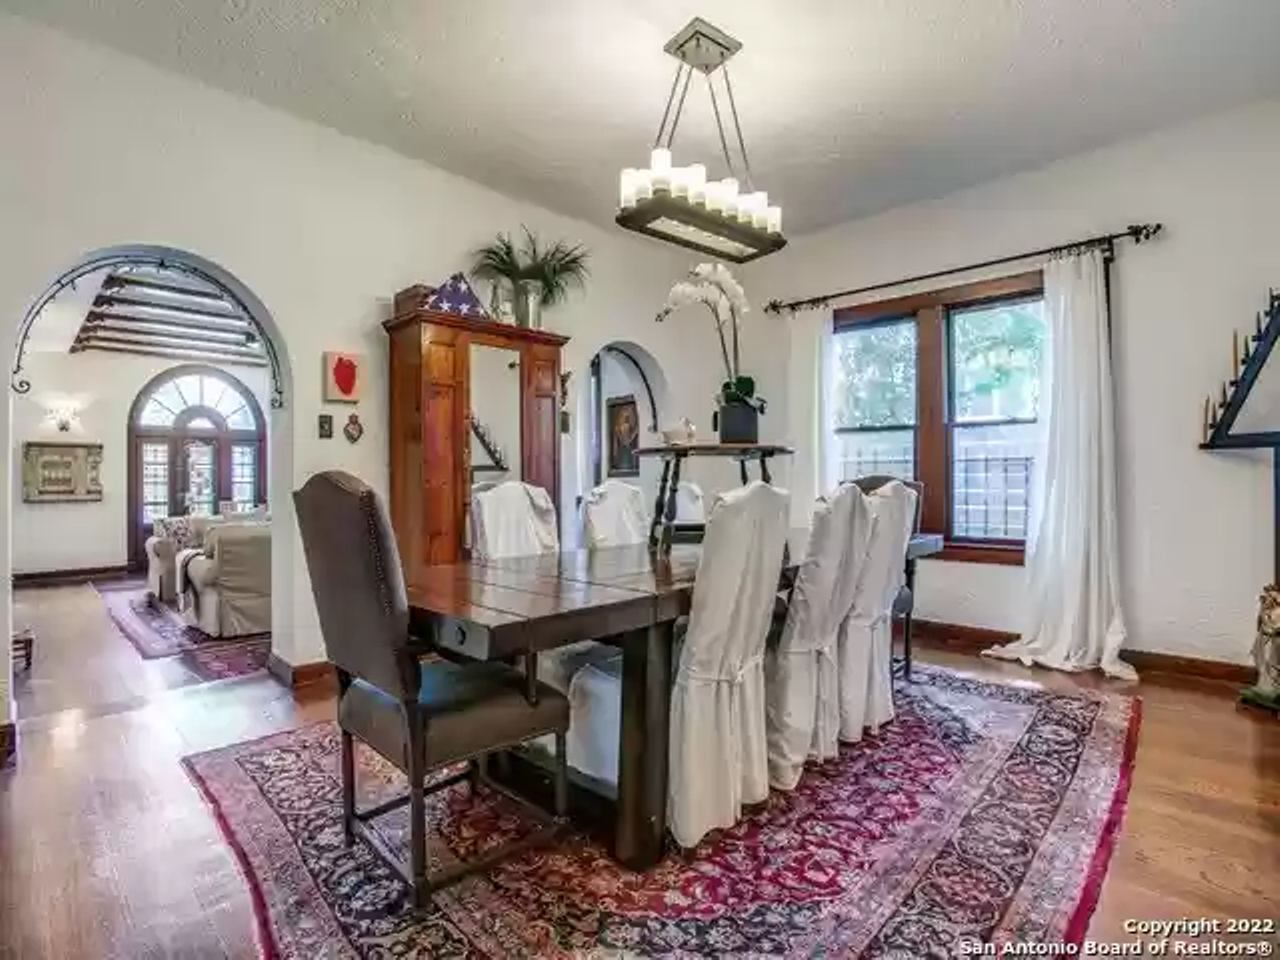 This historic Spanish-style near Woodlawn Lake has a domed mural and a spiral staircase